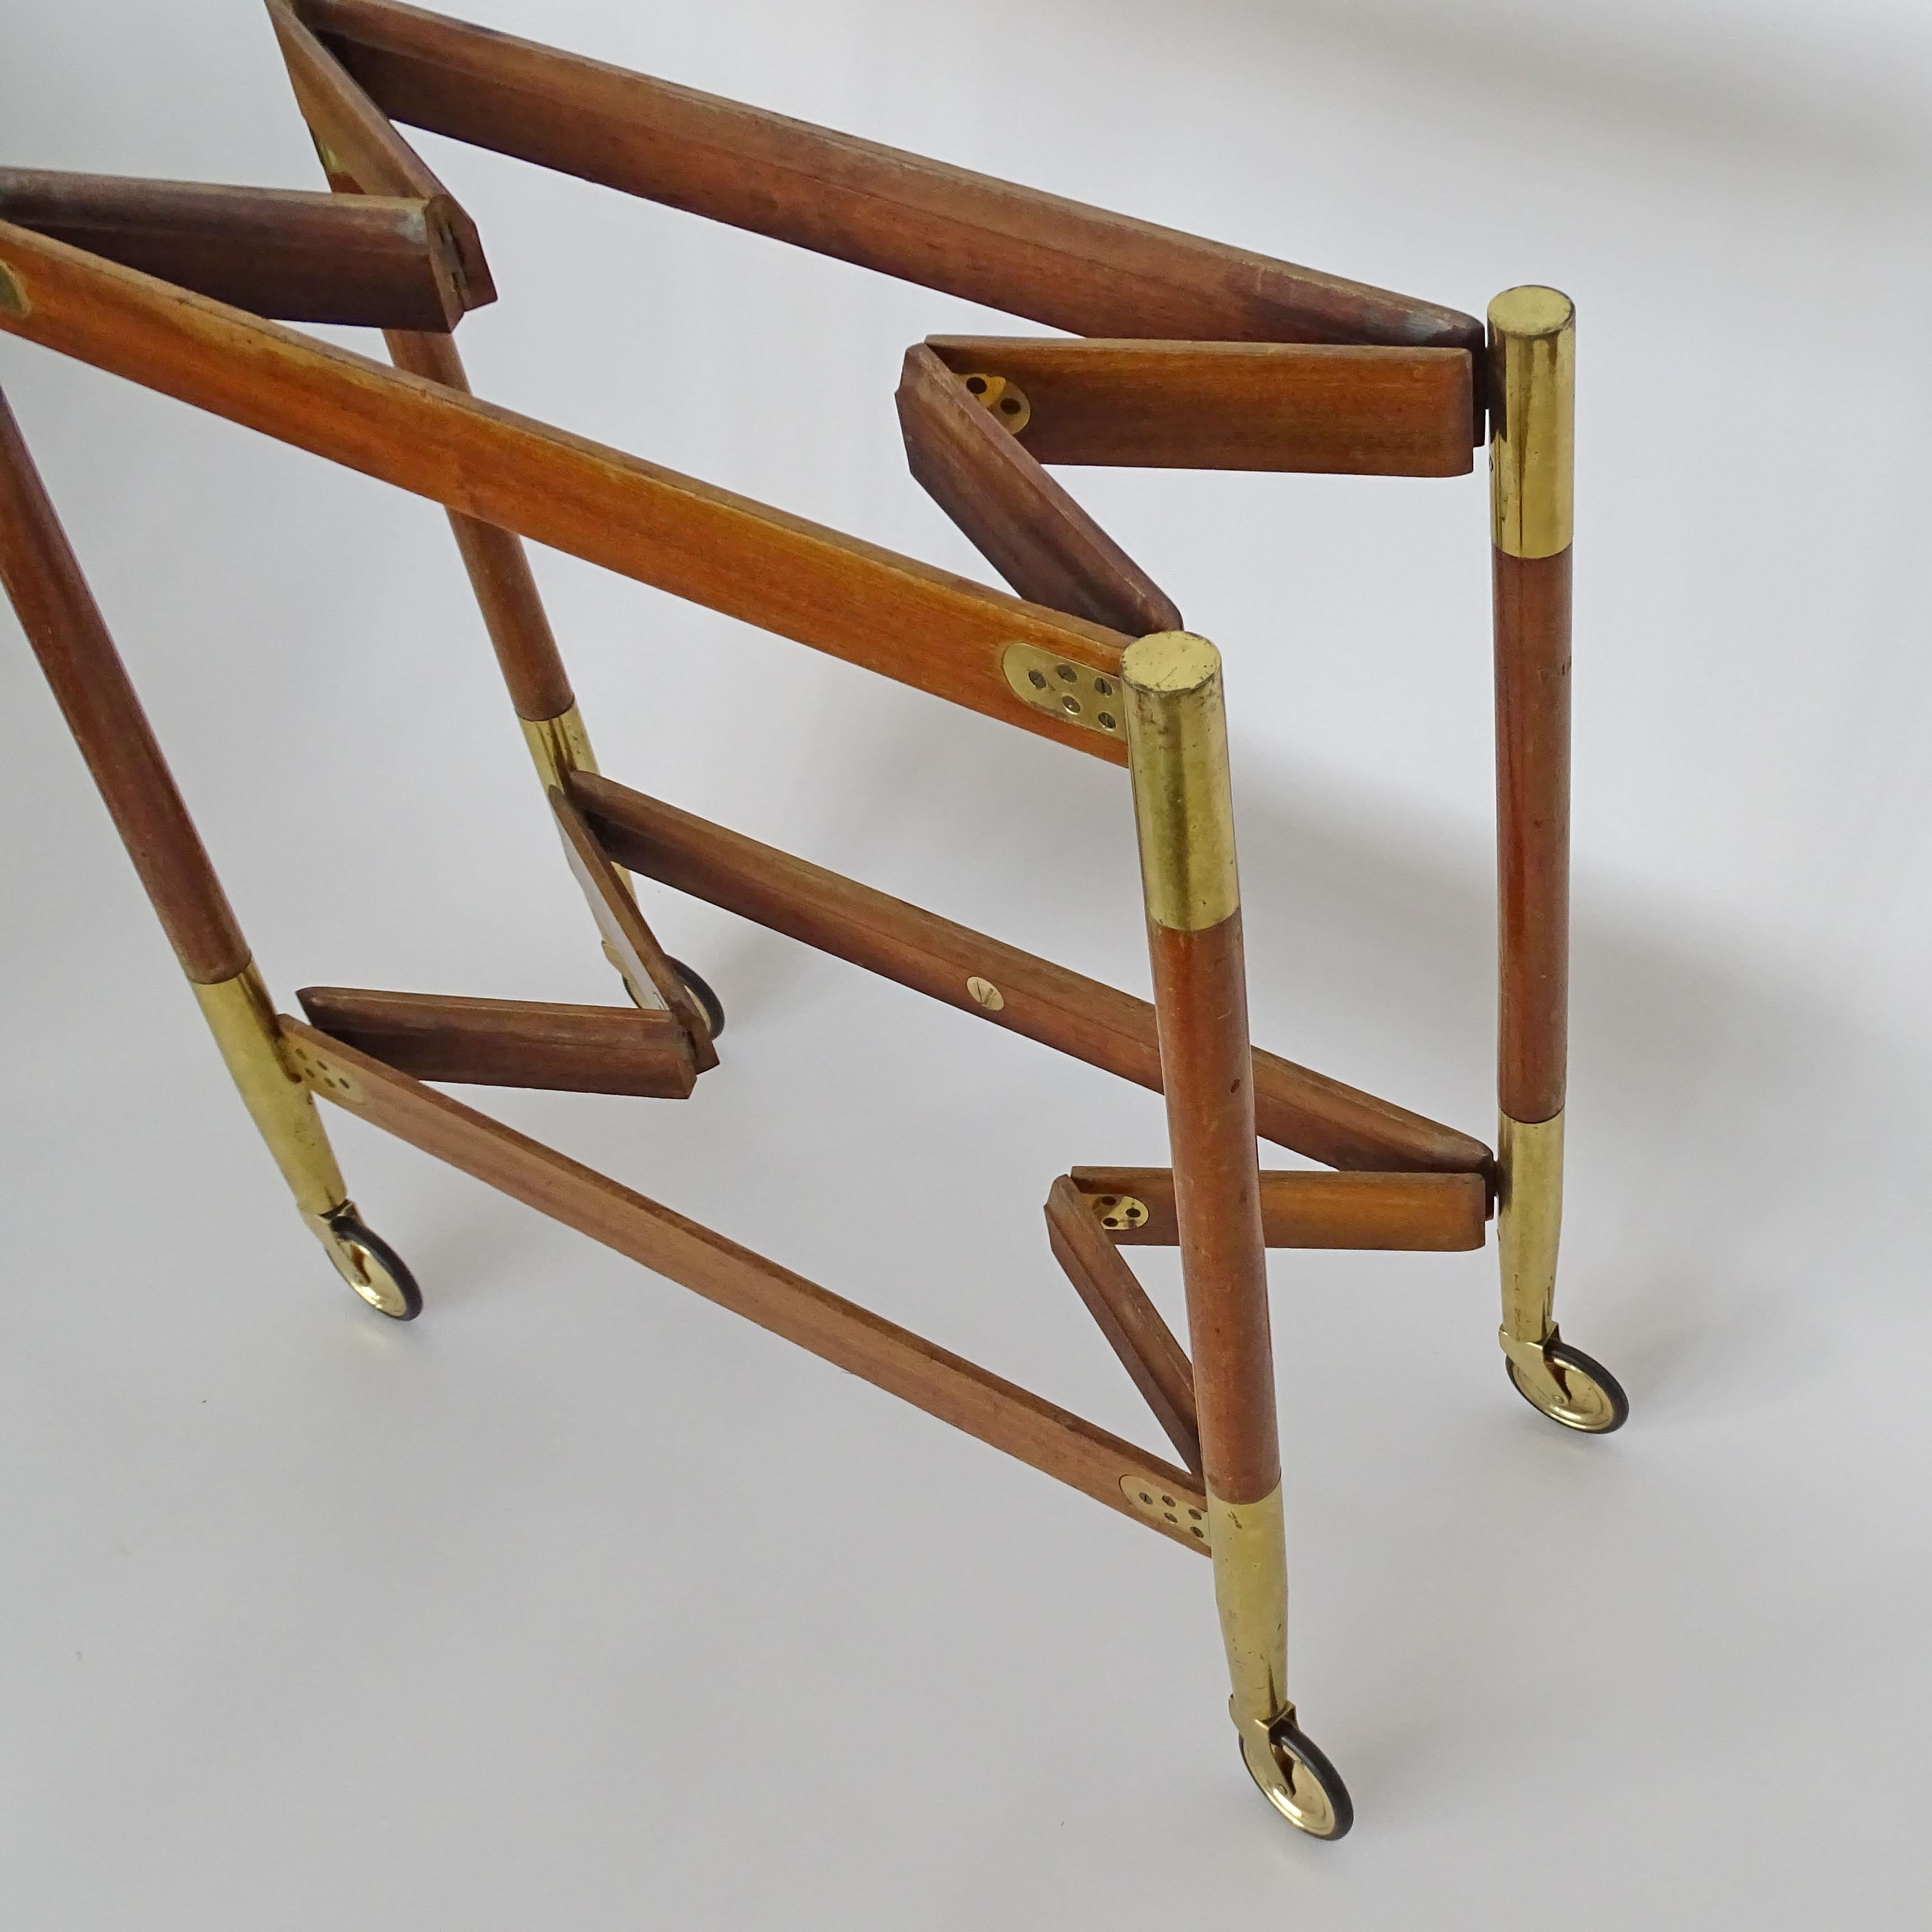 Piero Fornasetti Wood and Brass Folding Trolley, Italy, 1950s For Sale 3